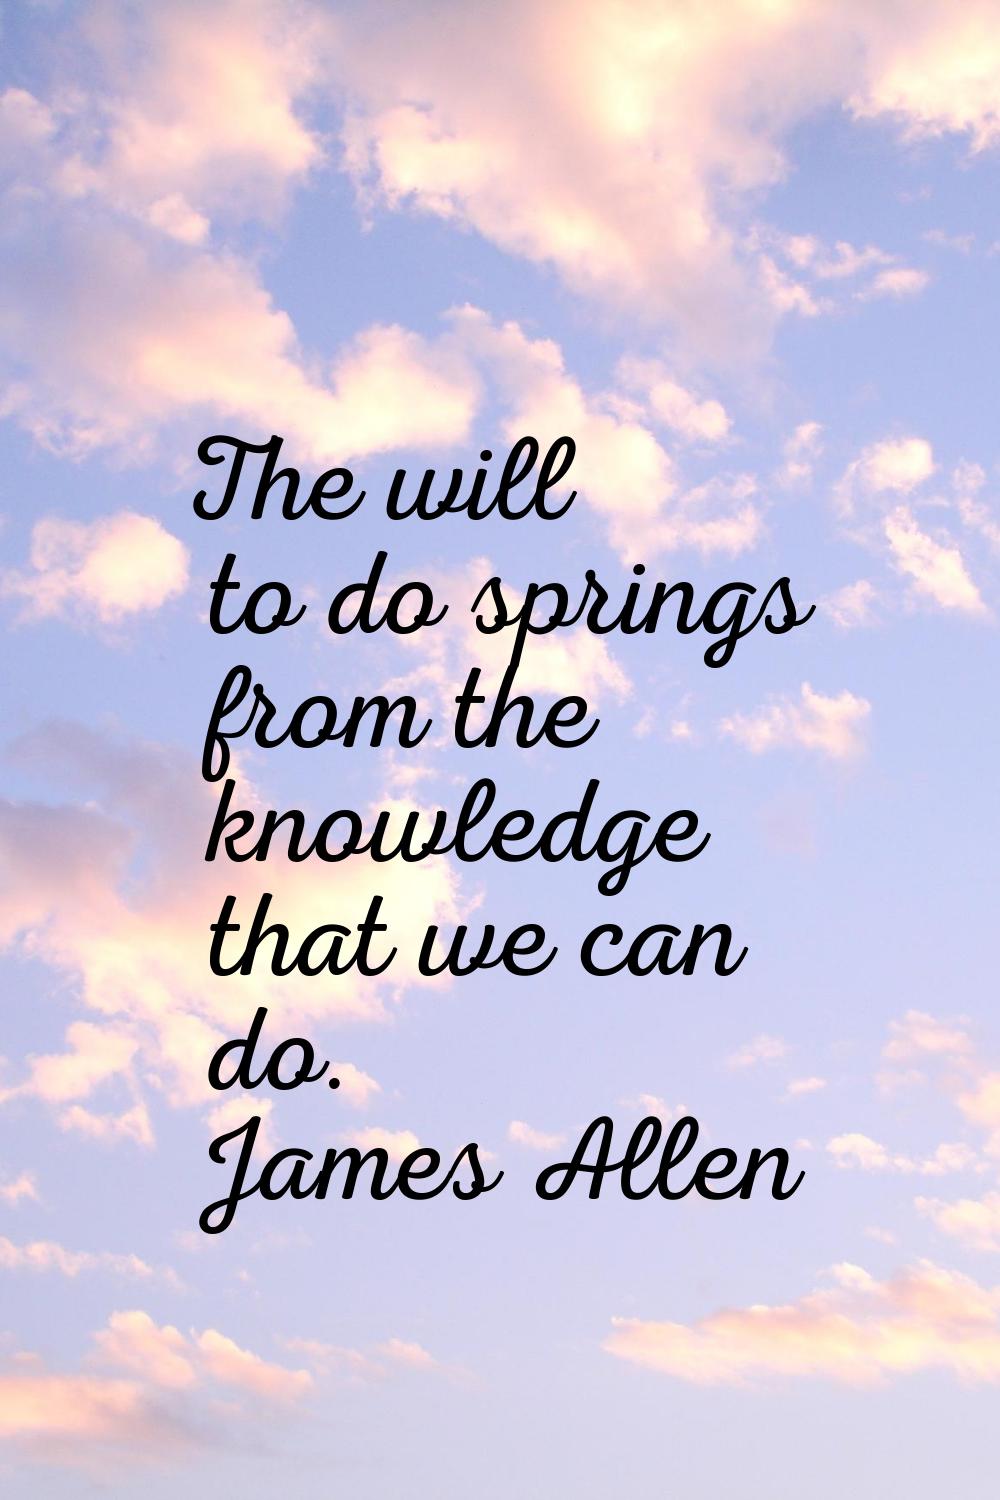 The will to do springs from the knowledge that we can do.